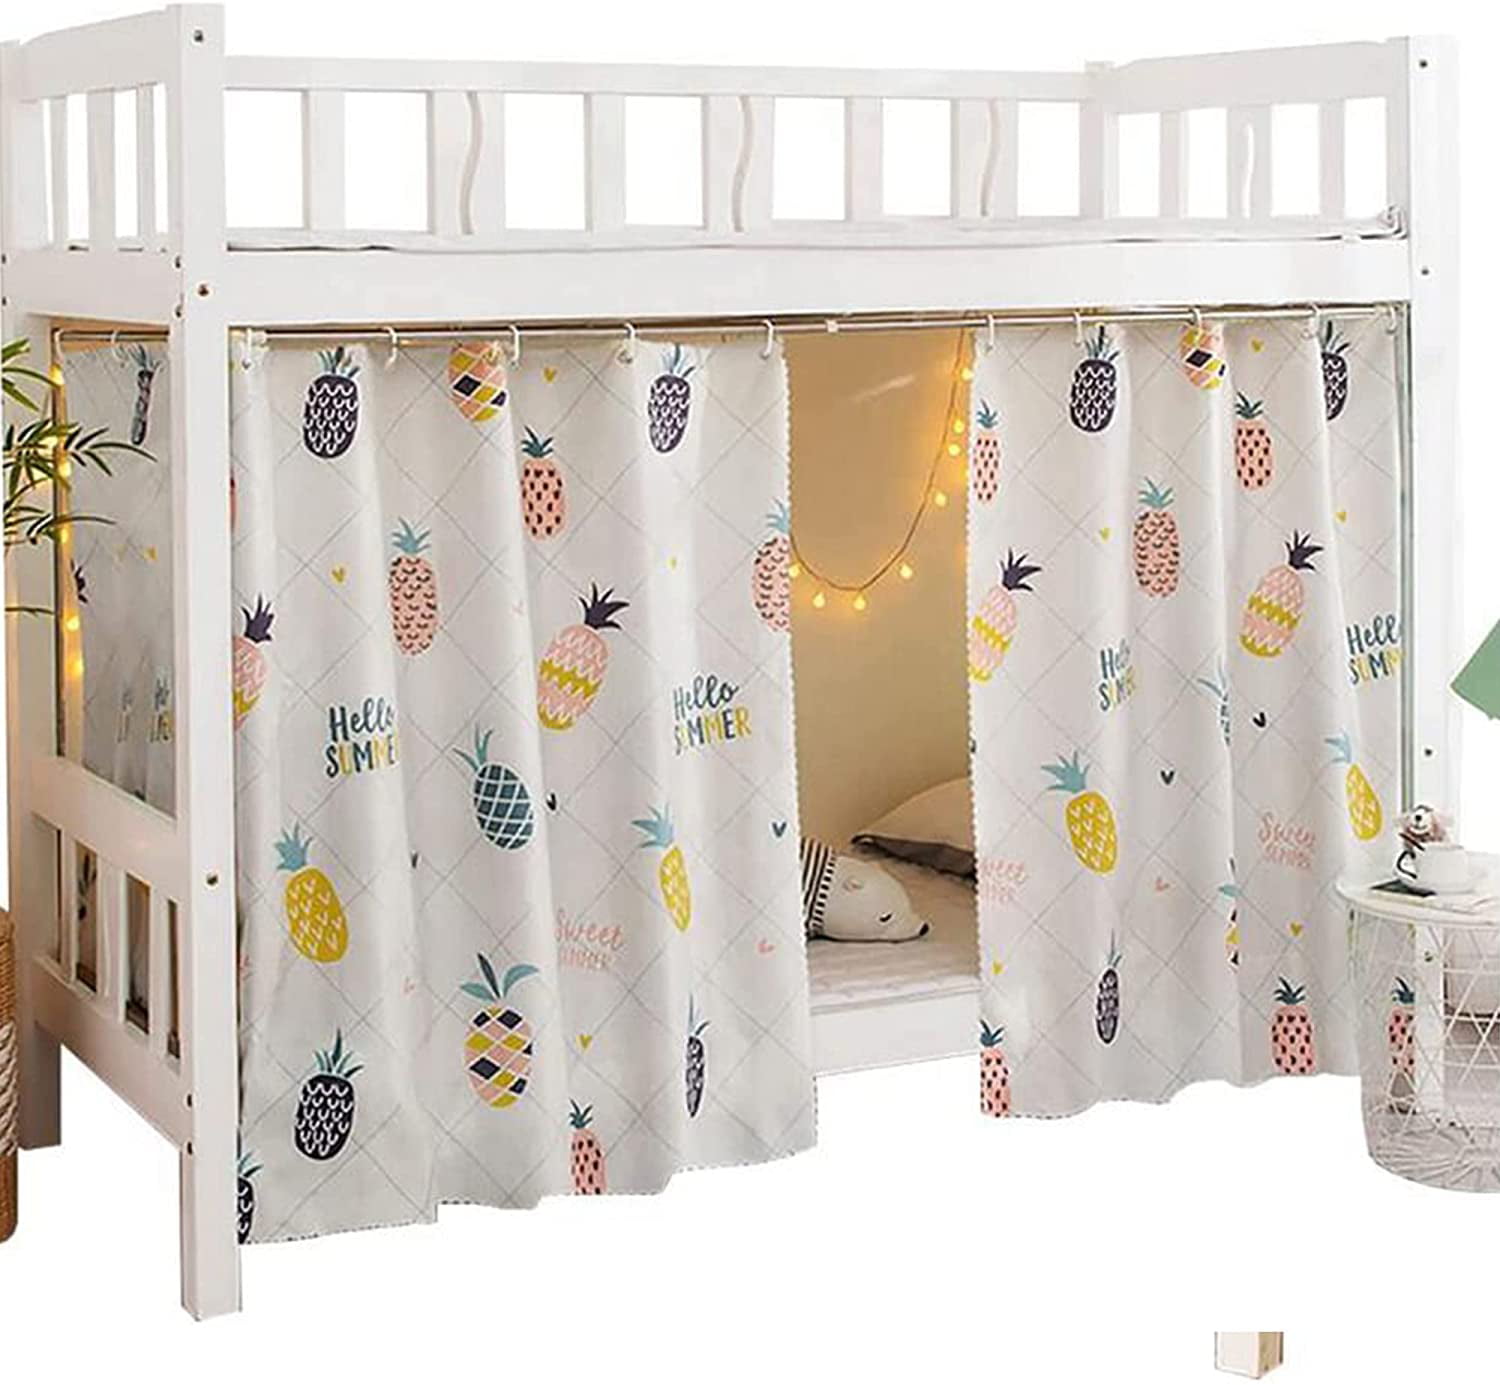 Wakauto Students Dormitory Bunk Bed Curtains Single Bed Tent Curtain Shading Nets Dustproof Blackout Cloth Bed Canopy Mosquito Protection Net Bedroom Cabin Decor 